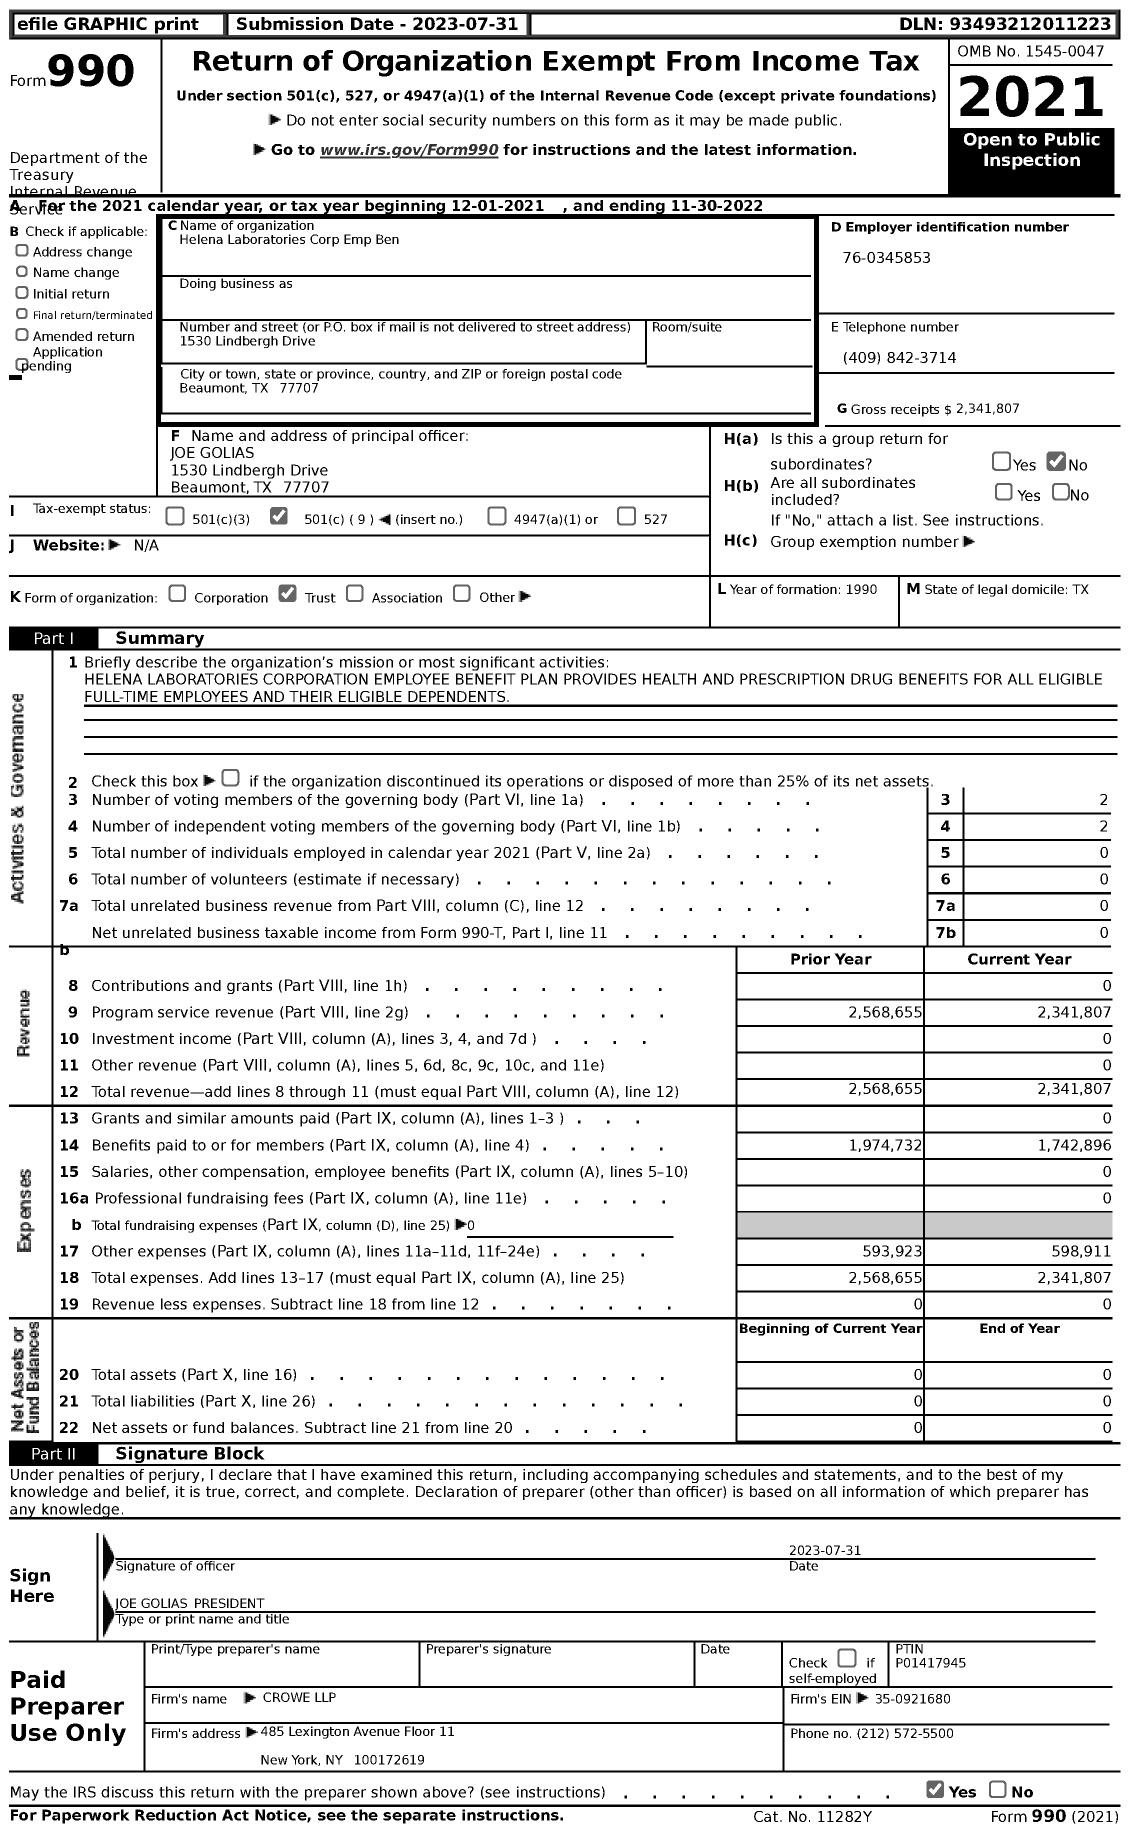 Image of first page of 2021 Form 990 for Helena Laboratories Corp Emp Ben